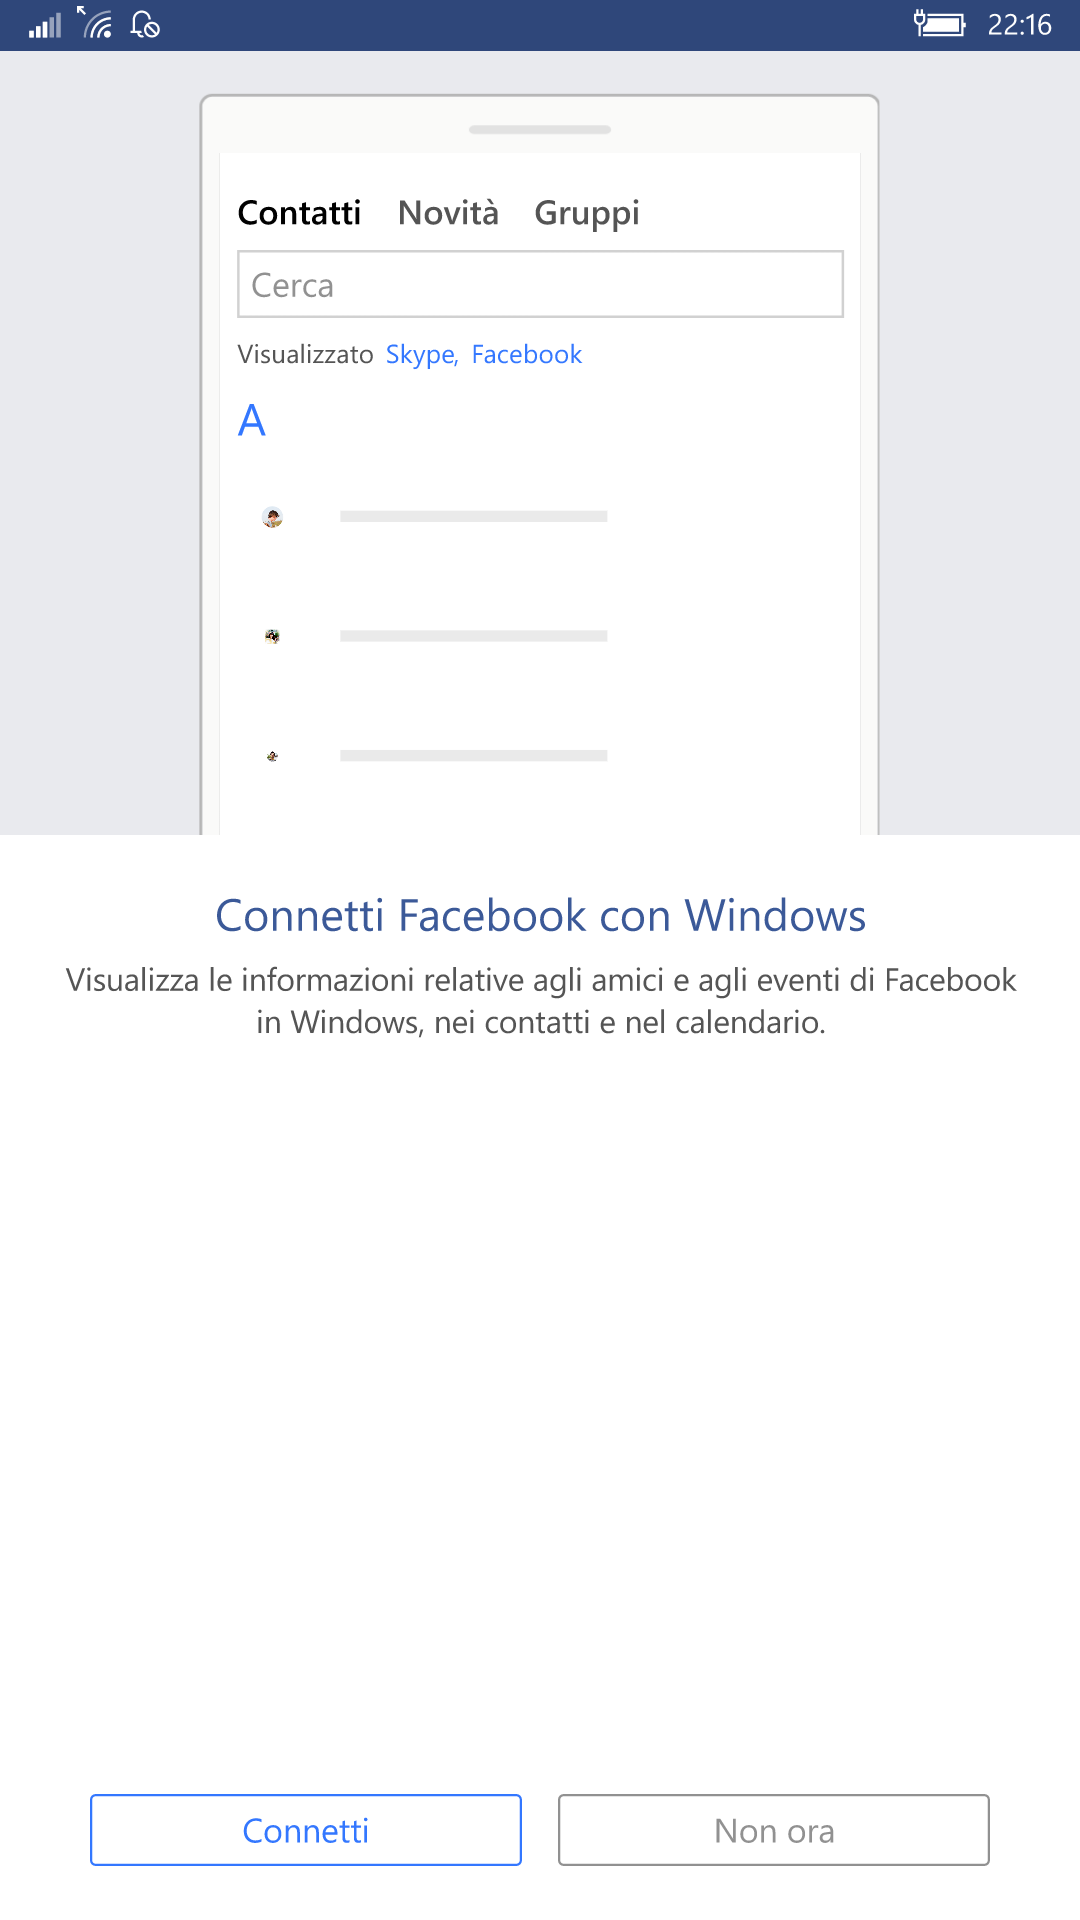 Facebook by Microsoft - Windows 10 Mobile - 2